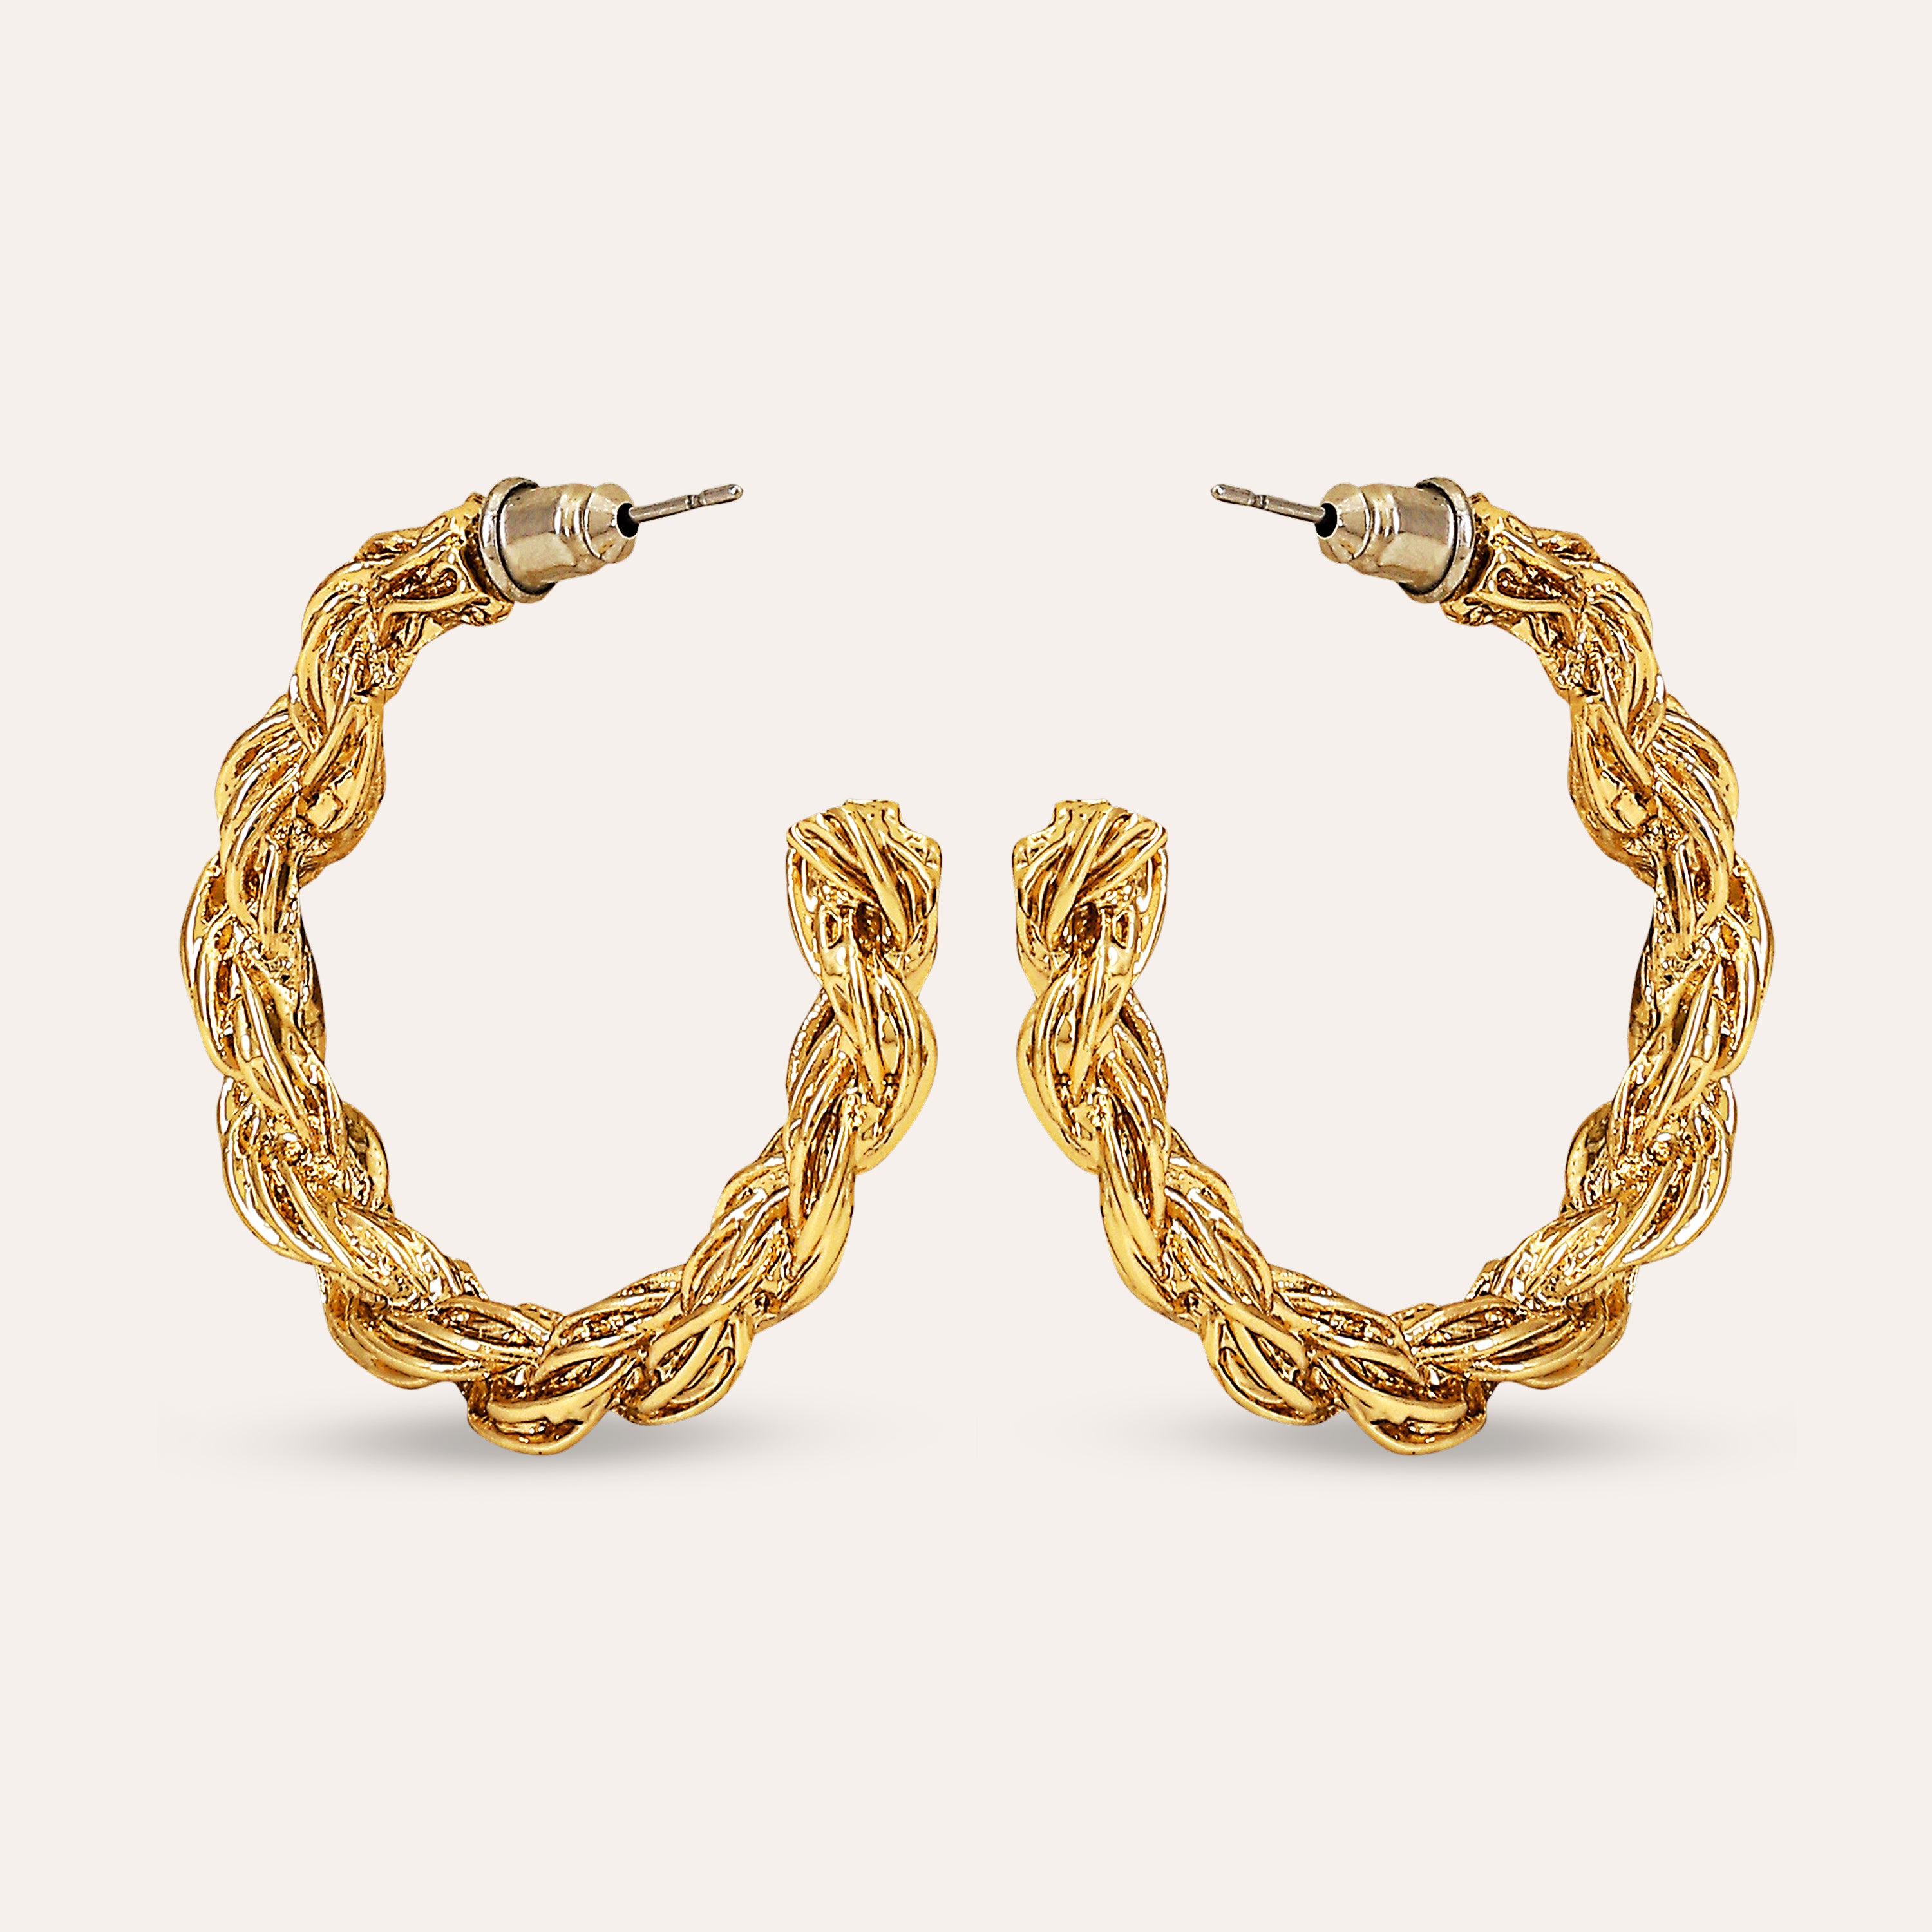 TFC Braided Italian Charm Luxury Hoop Earrings- Discover daily wear gold earrings including stud earrings, hoop earrings, and pearl earrings, perfect as earrings for women and earrings for girls.Find the cheapest fashion jewellery which is anti-tarnis​h only at The Fun company